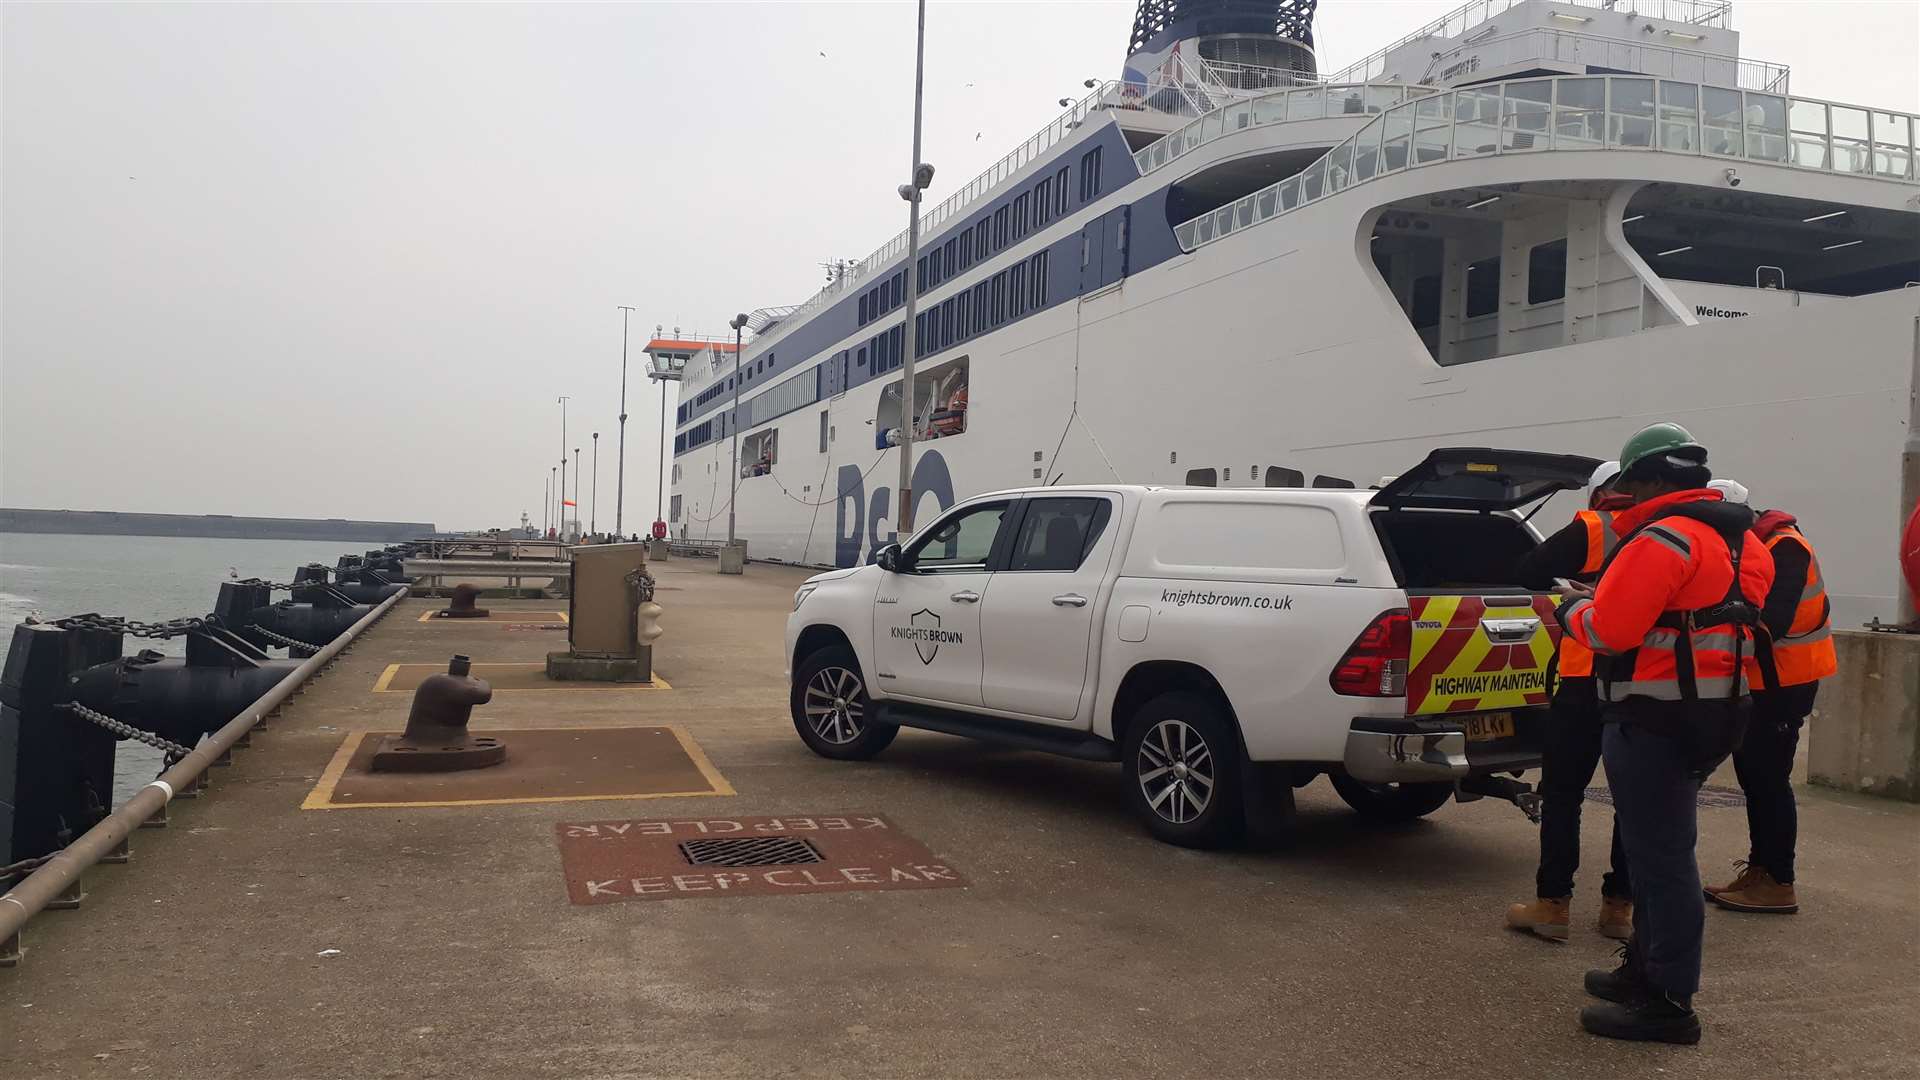 Knights Brown working at the Port of Dover